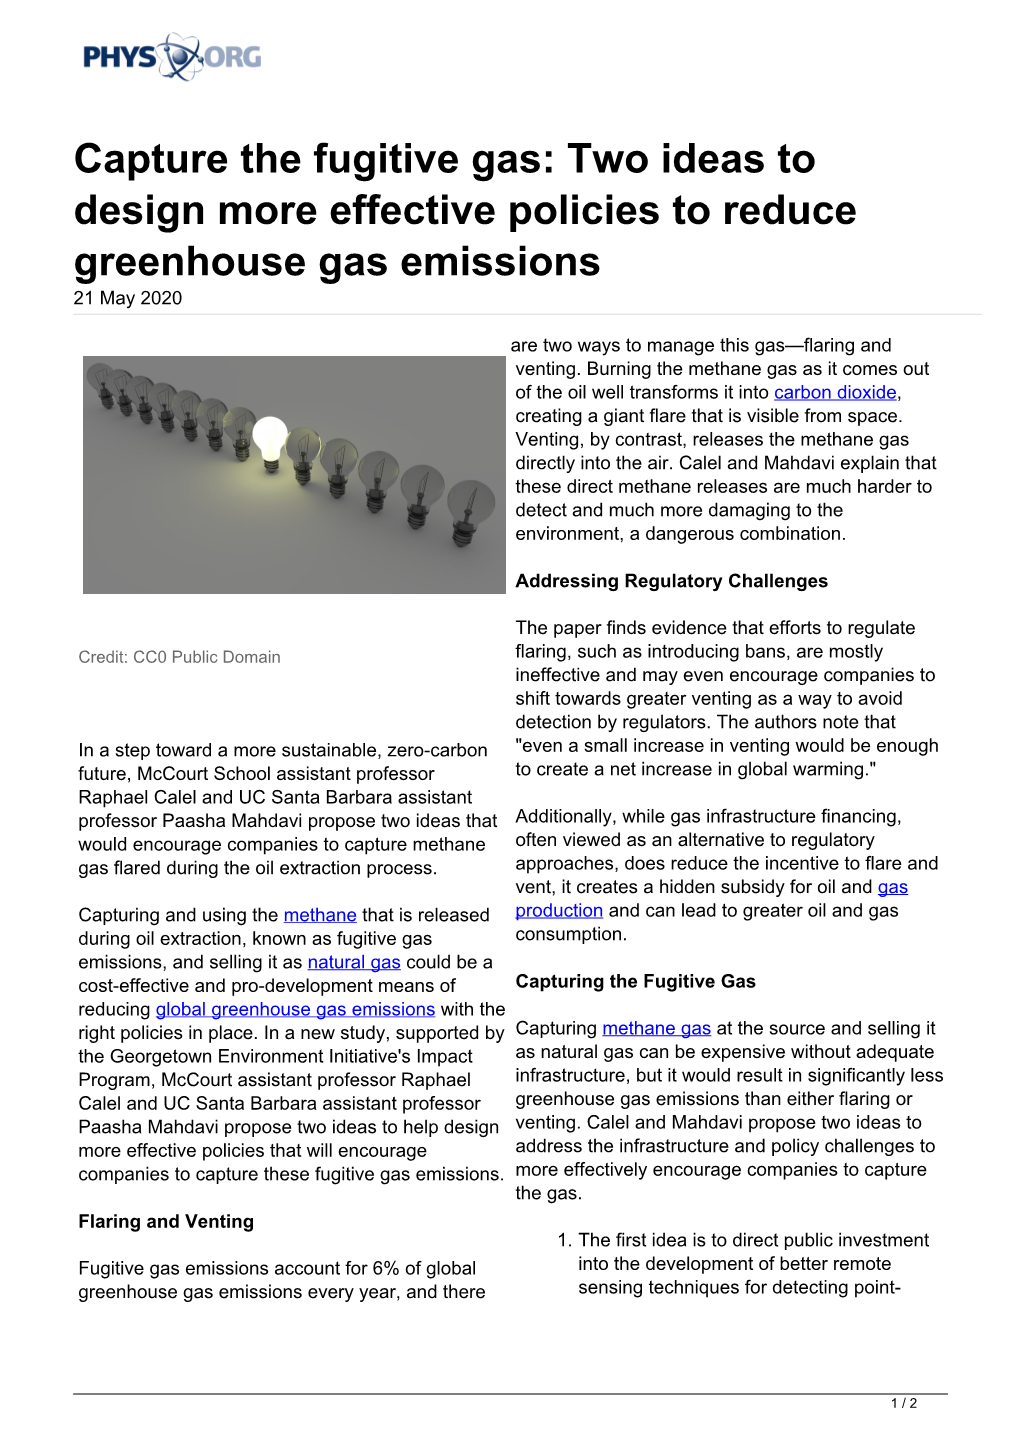 Two Ideas to Design More Effective Policies to Reduce Greenhouse Gas Emissions 21 May 2020